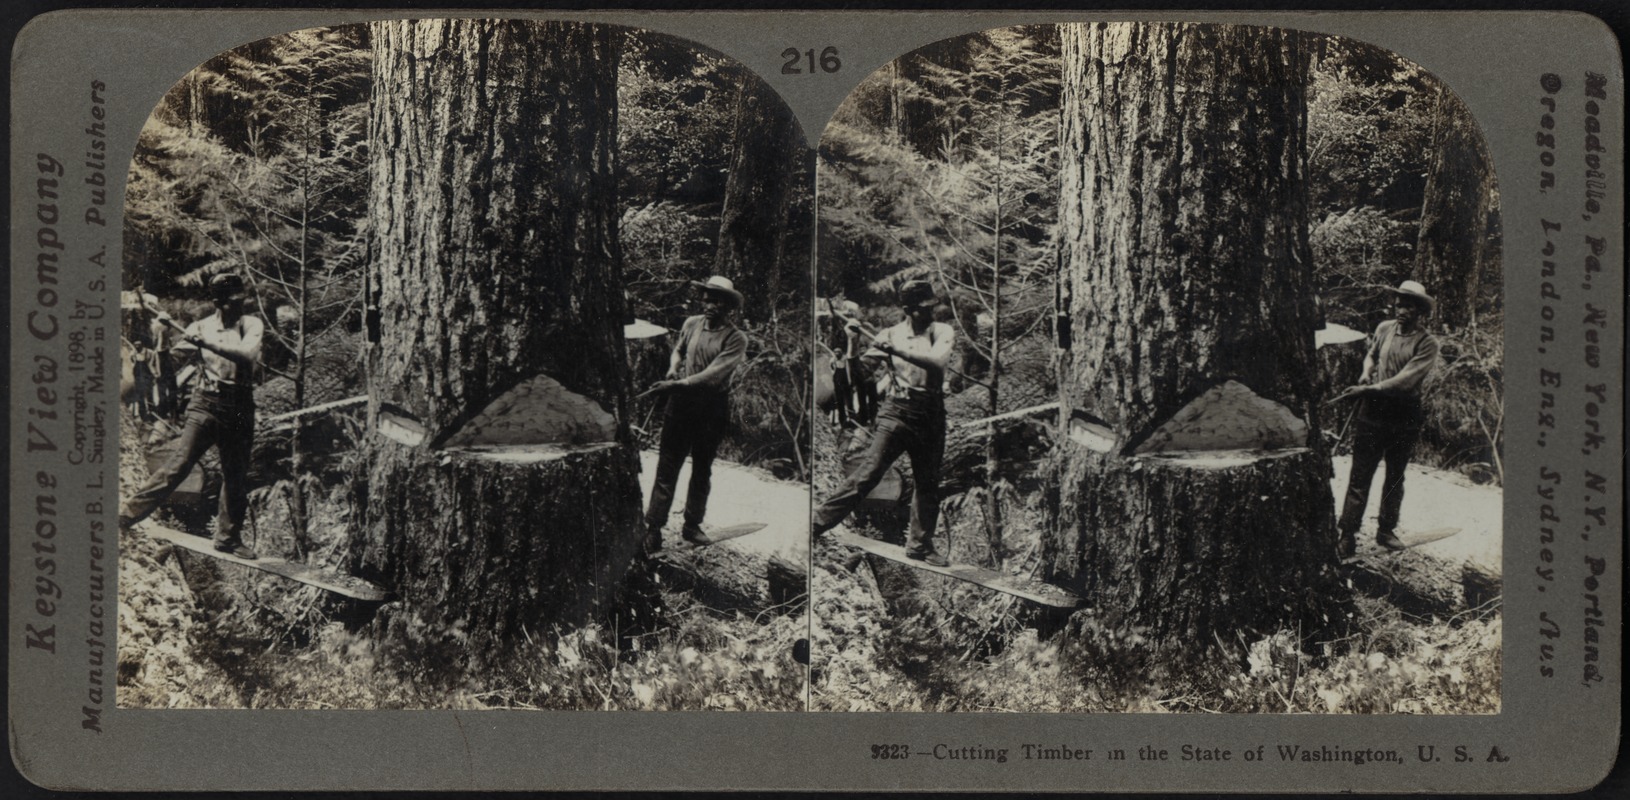 Cutting timber in the state of Washington, U.S.A.